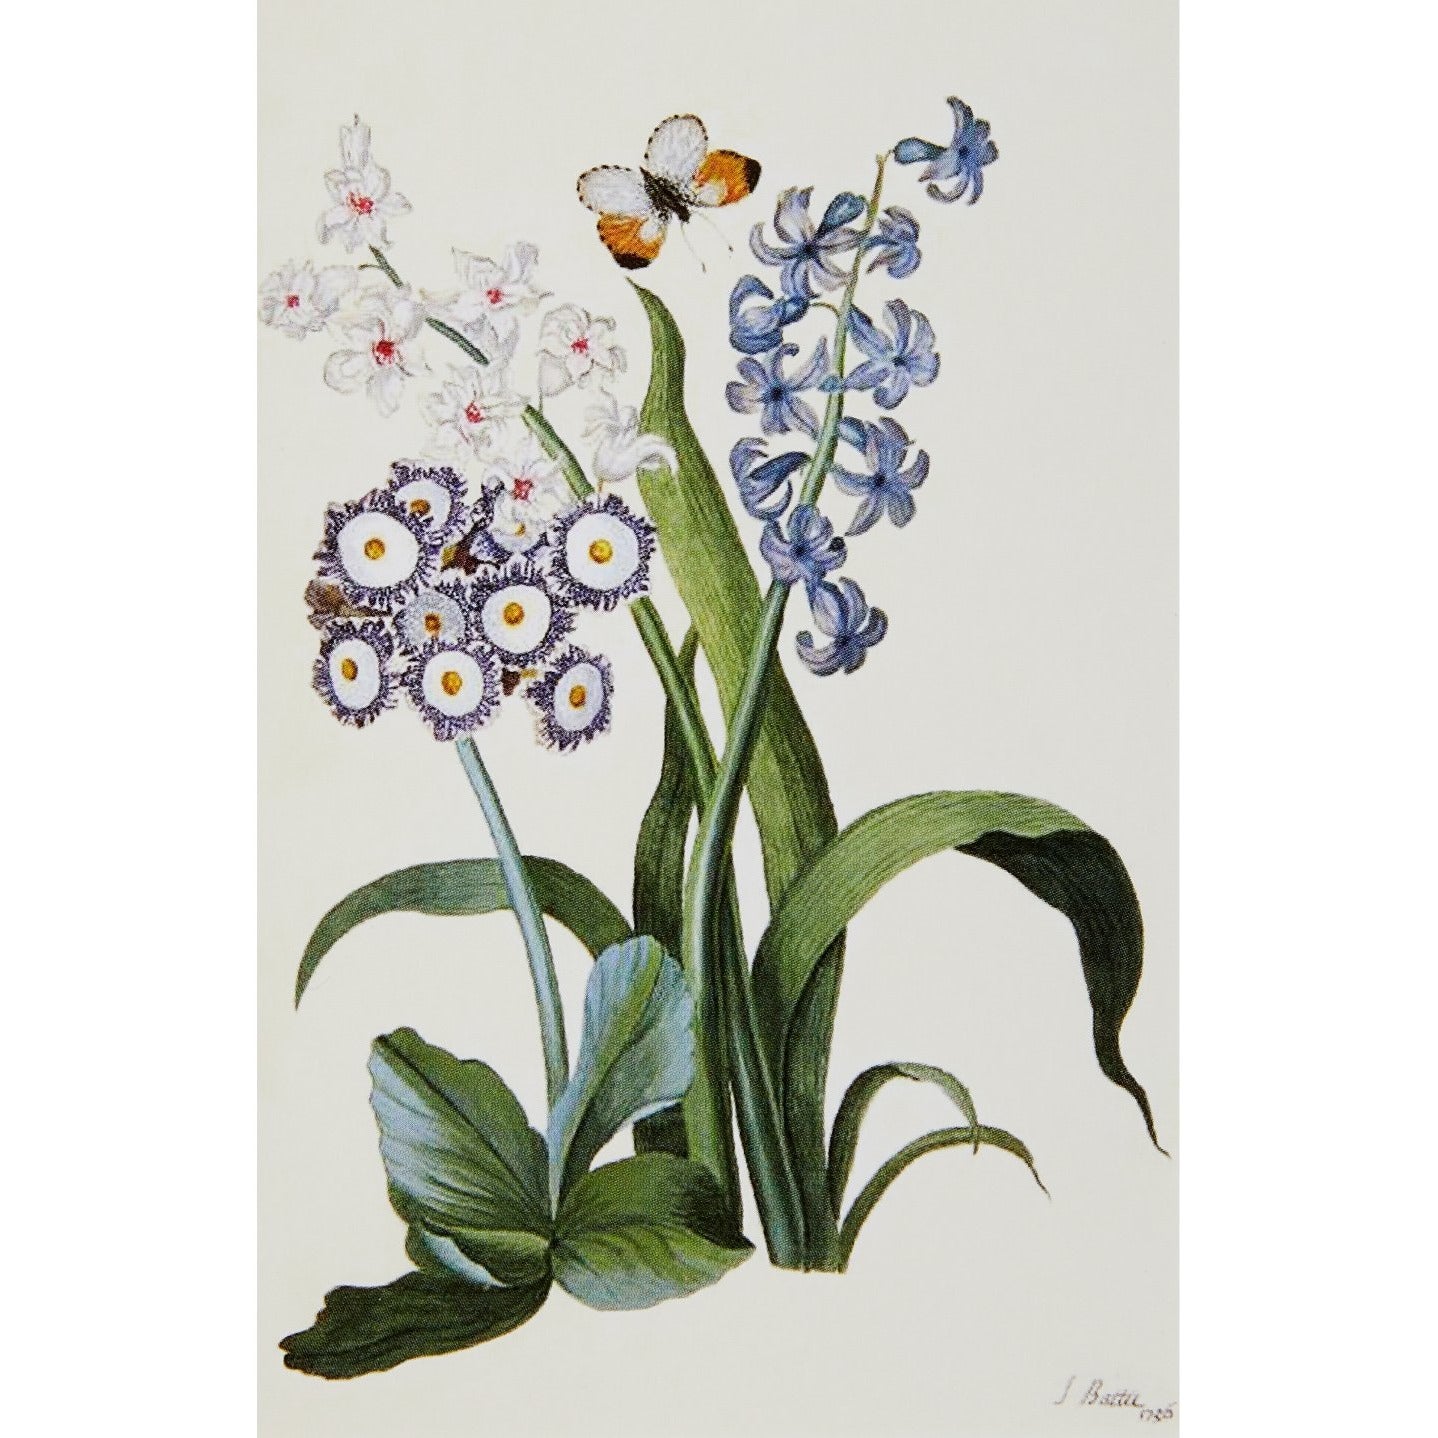 Notecard - Woodland Flowers by J. Battie. From the Broughton Collection of the Fitzwilliam Museum, brought to you by CuratingCambridge.